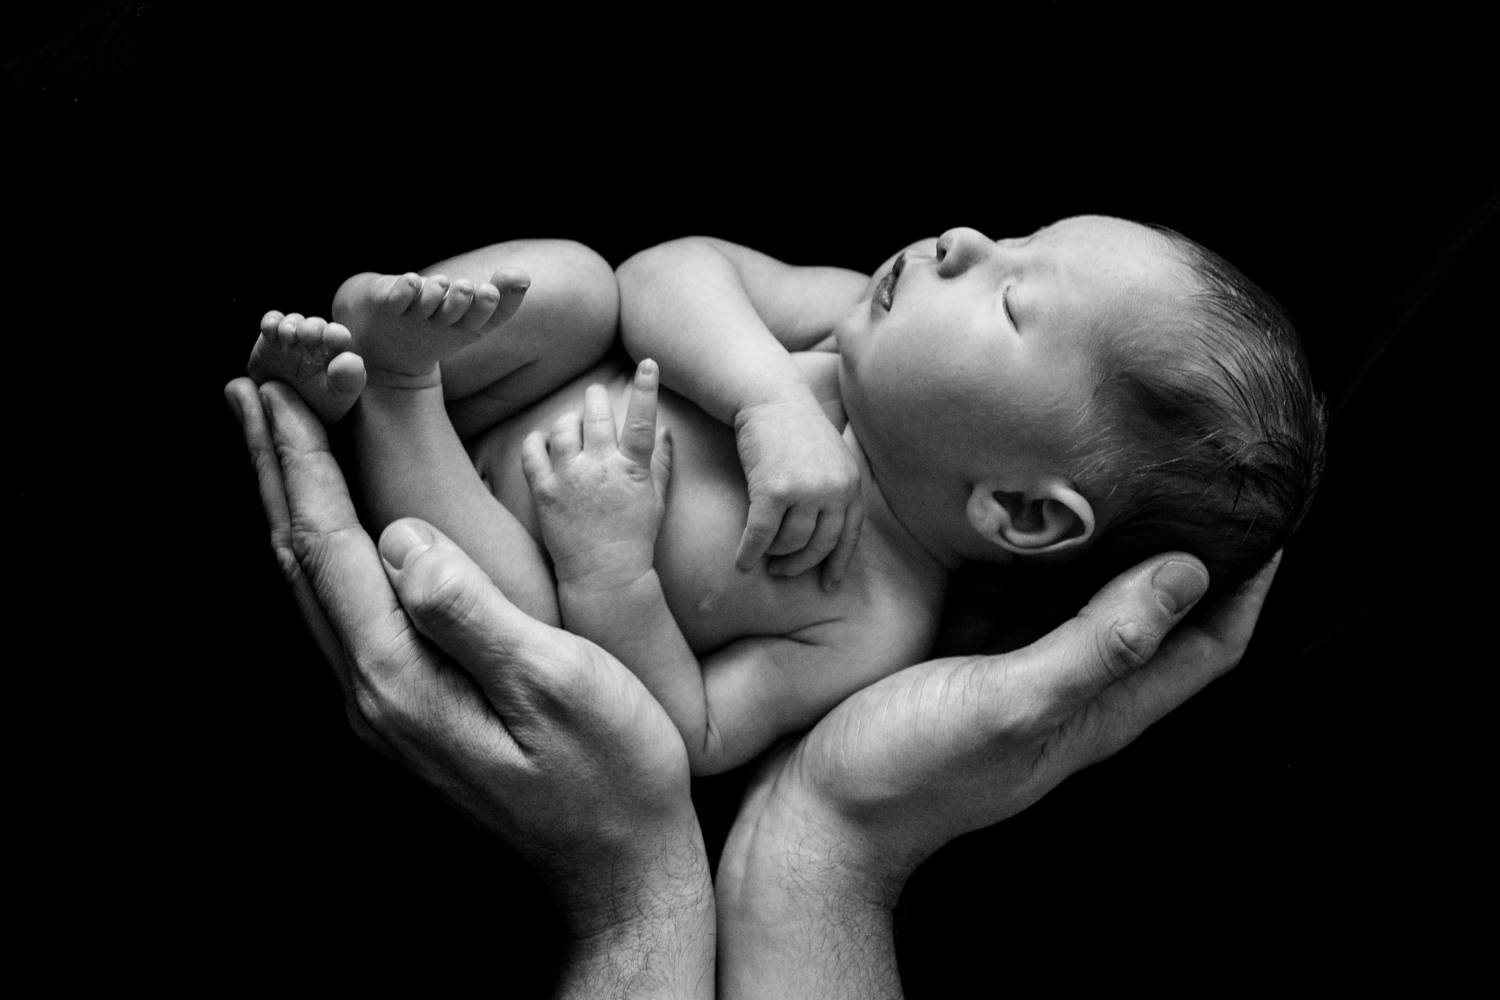 Newborn baby held in his father's hands in black and white